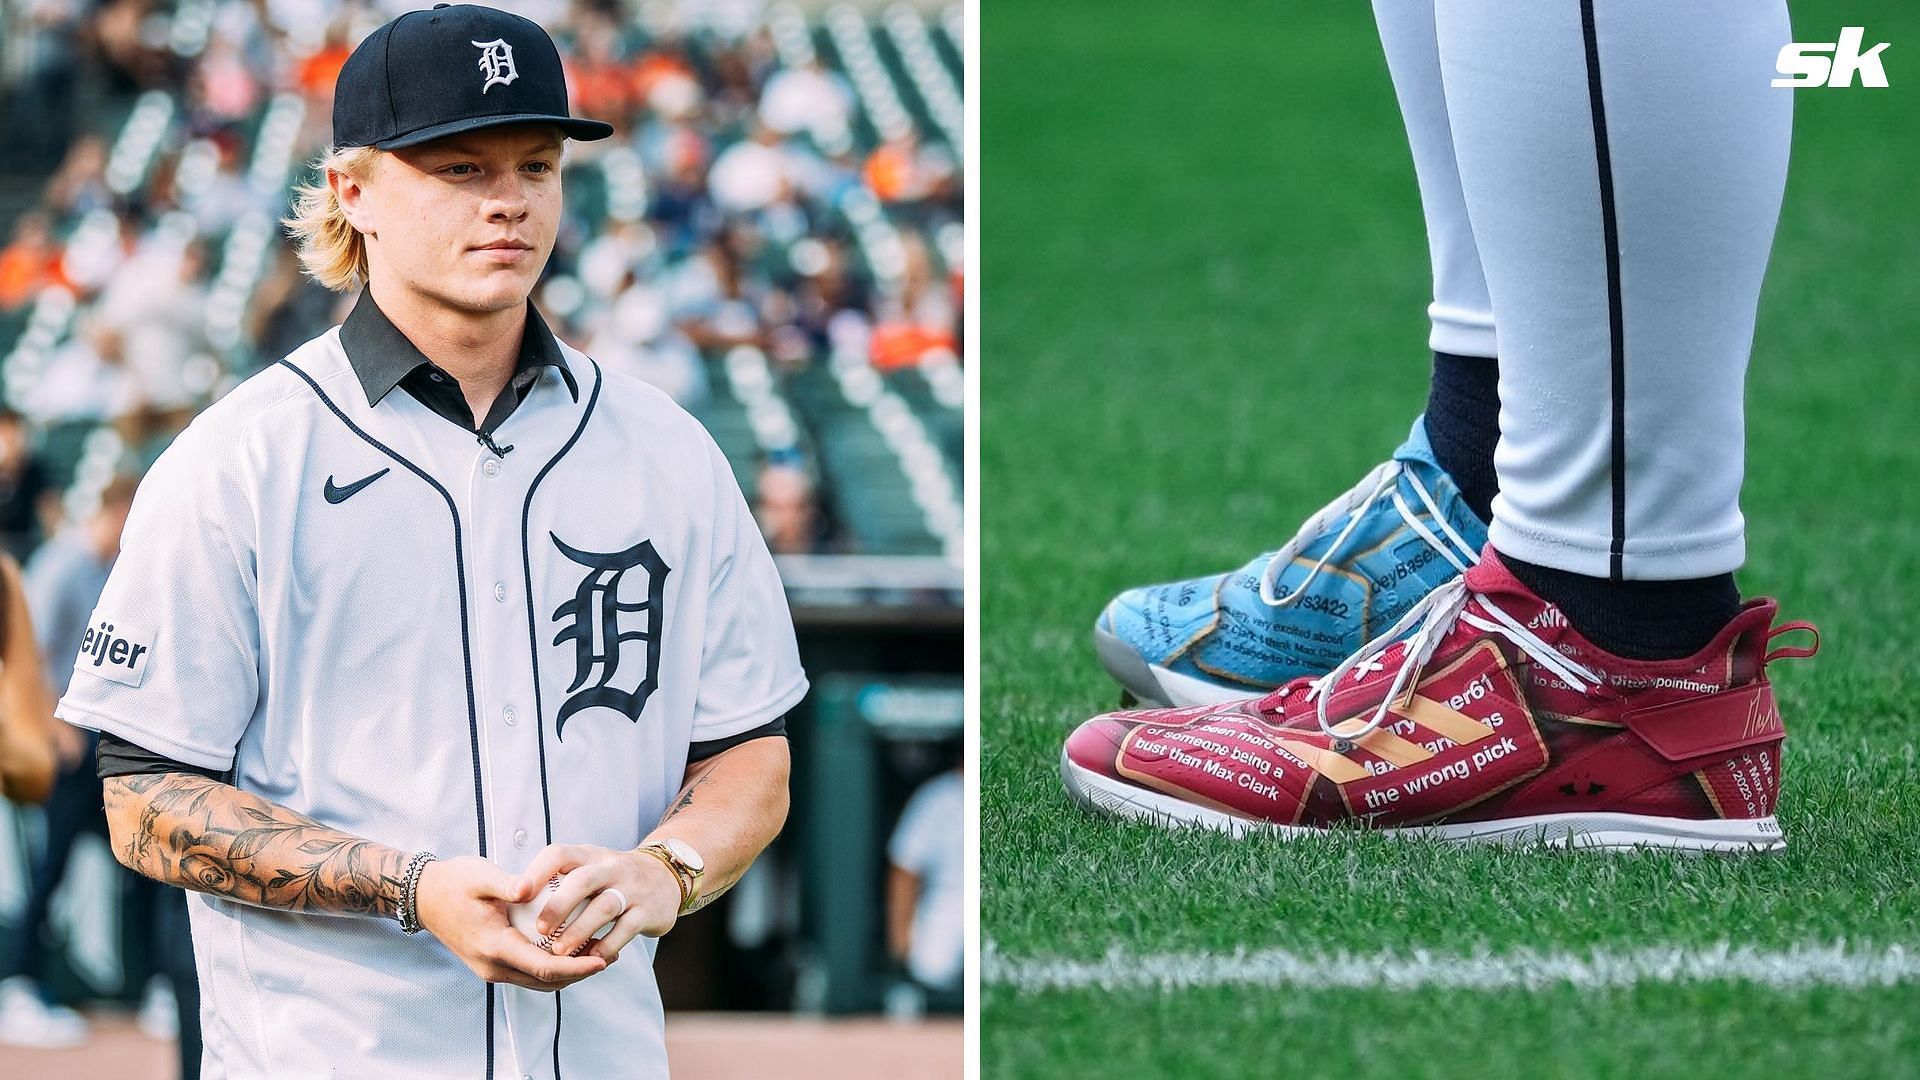 &quot;The wrong pick&quot; - Tigers top prospect Max Clark rocks custom Adidas cleats featuring haters